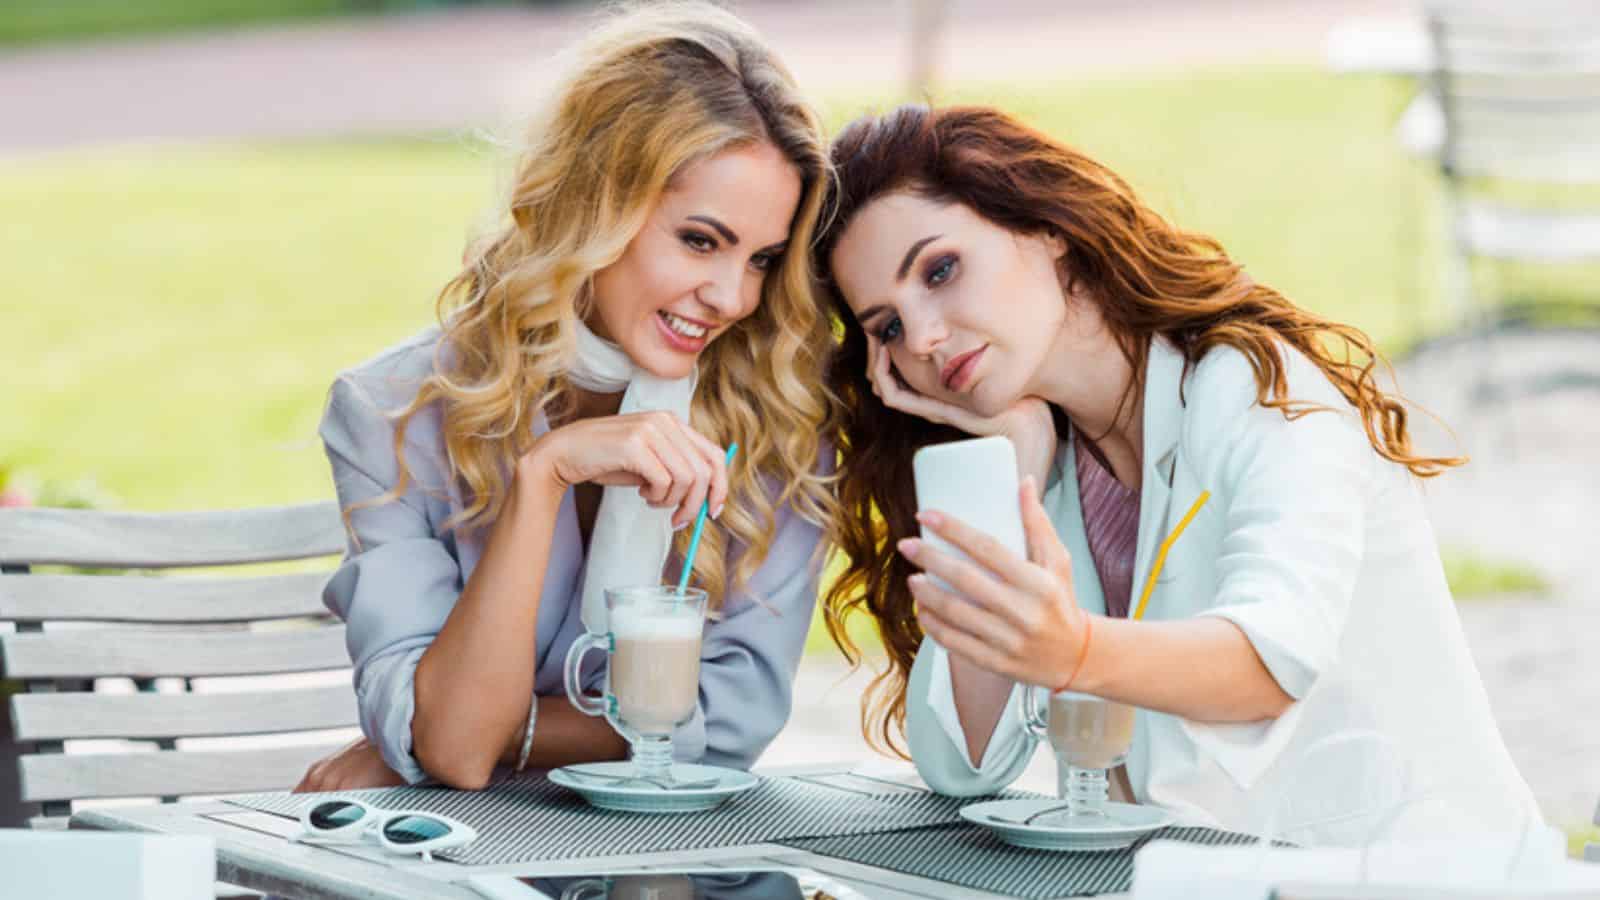 Beautiful young women taking selfie while sitting in cafe